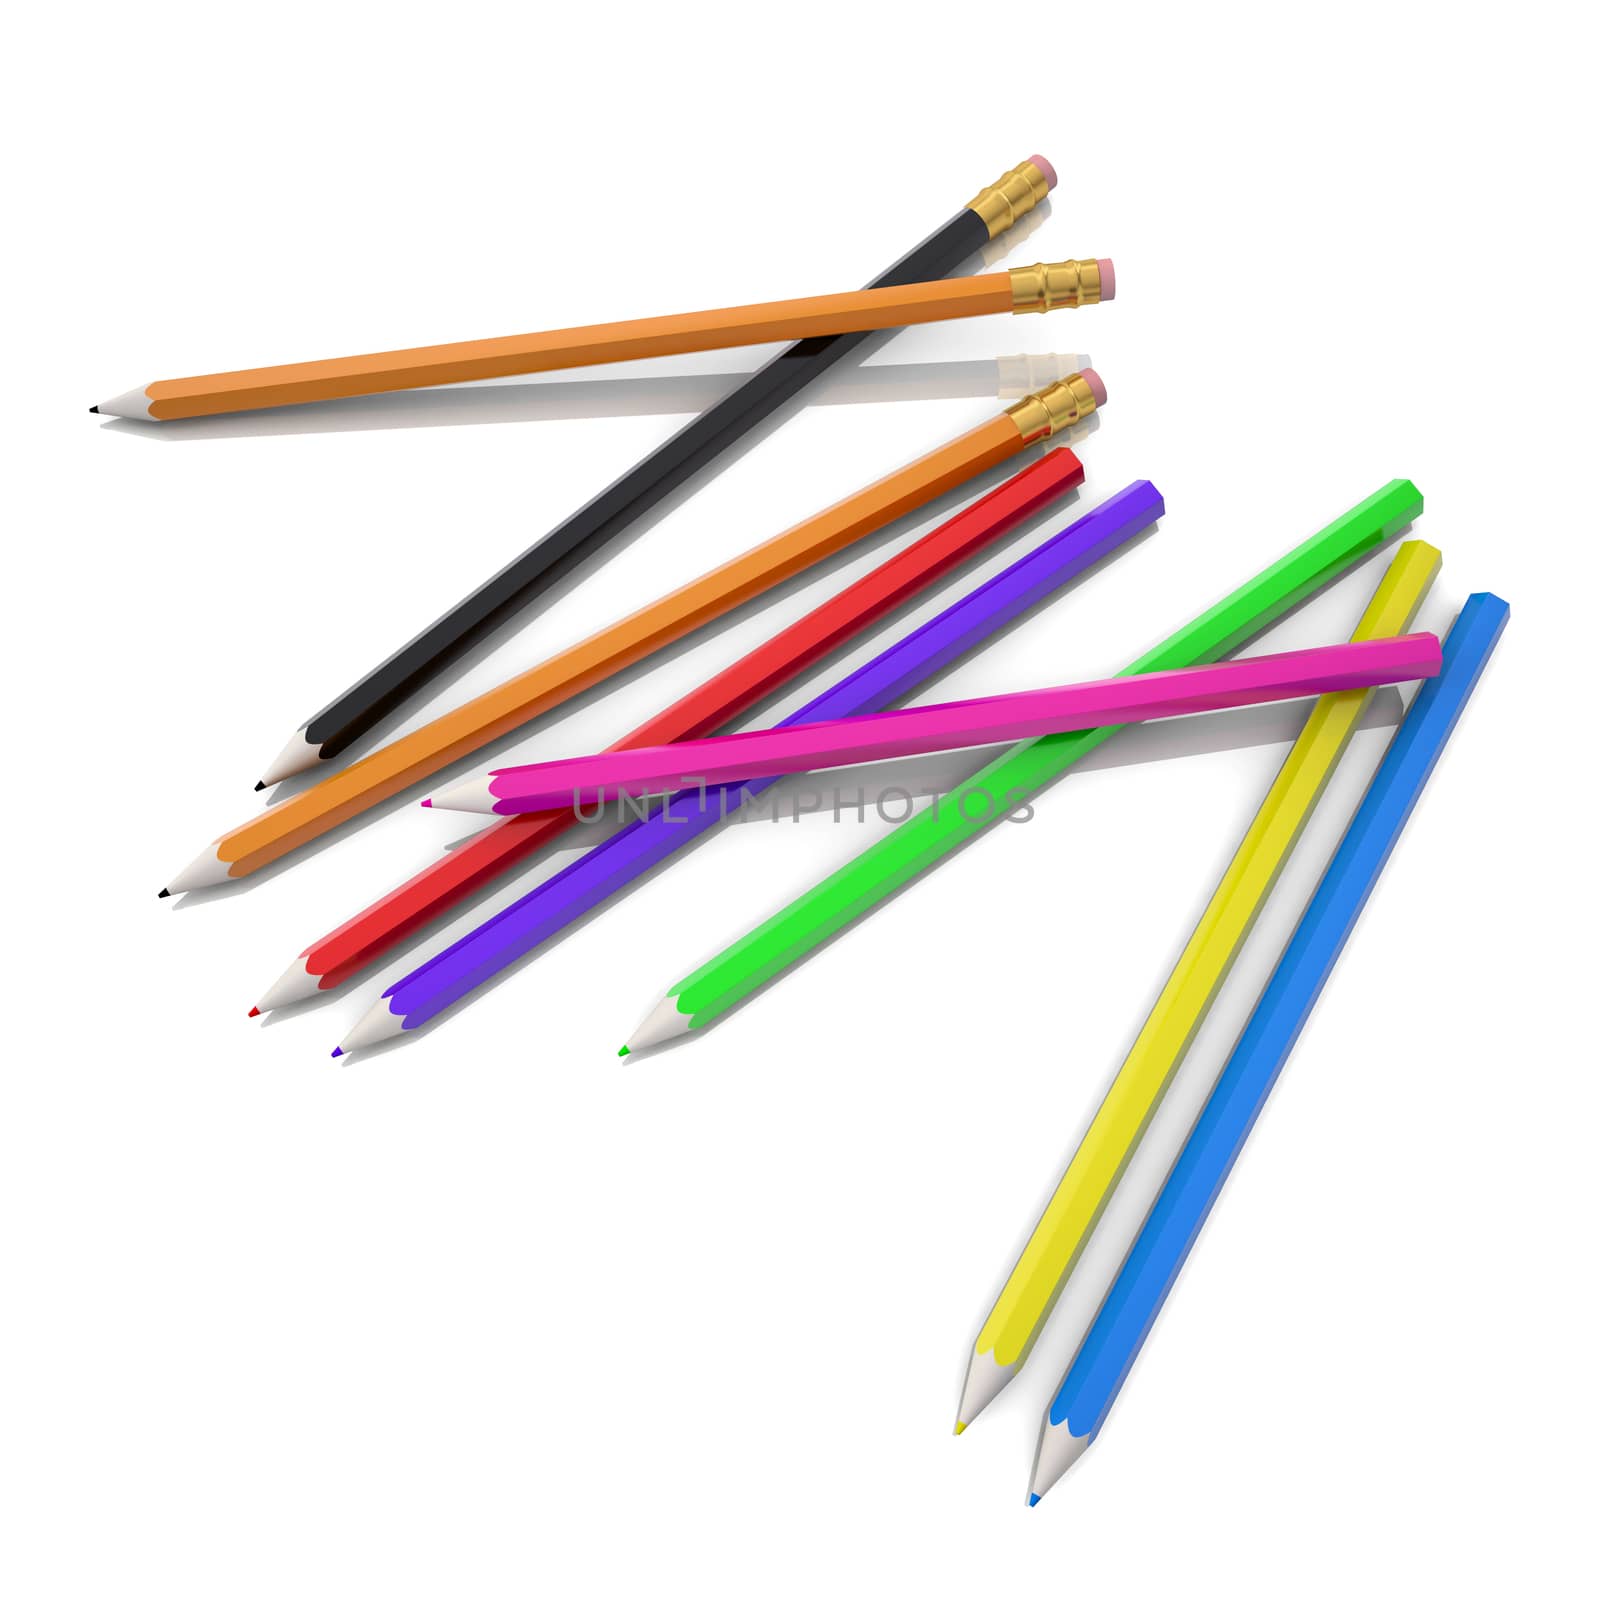 Colored pencils. Isolated render on a white background